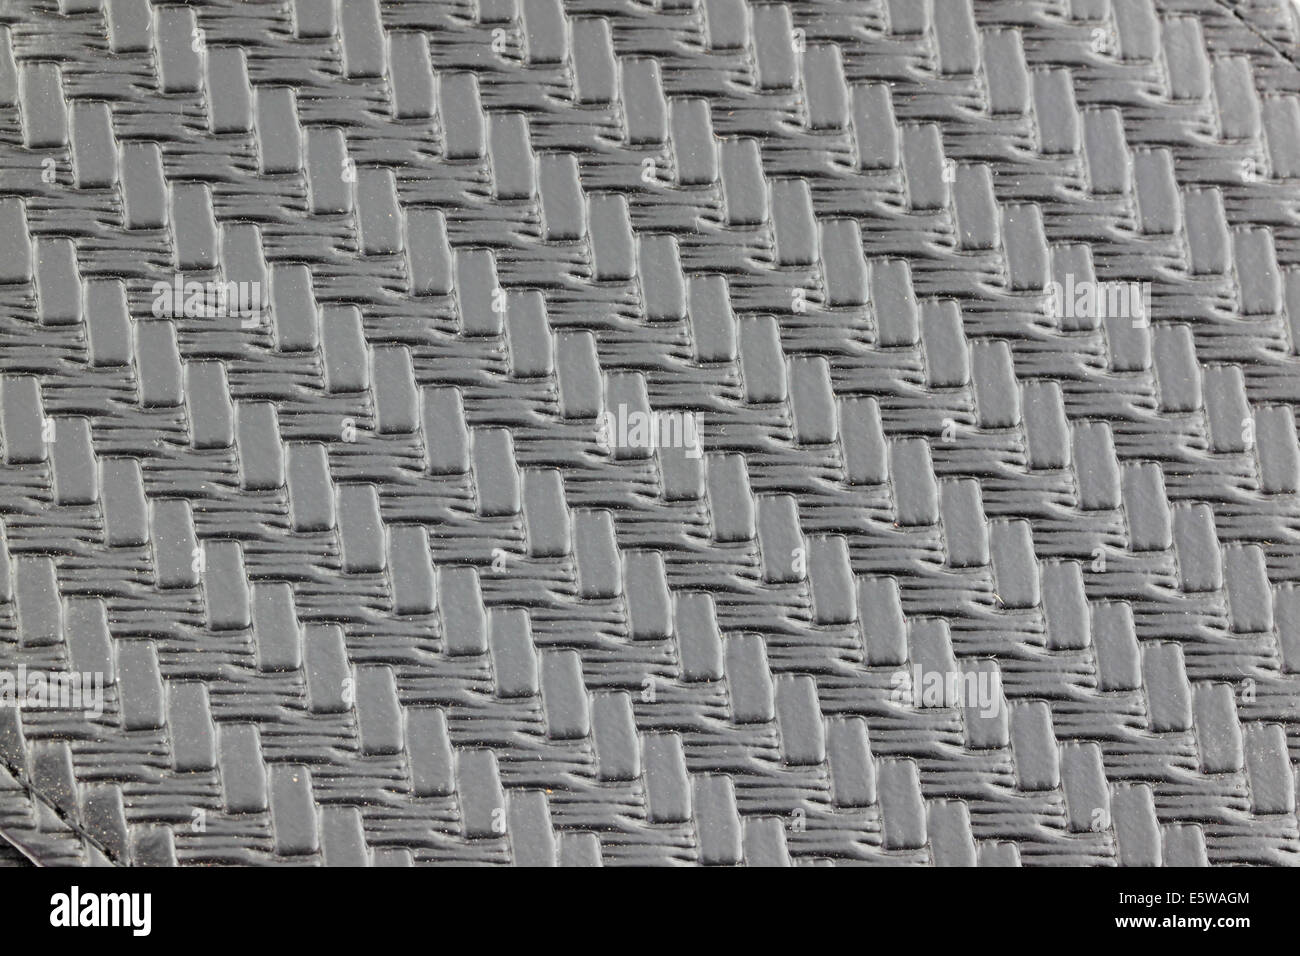 Textured and pattern of black leather for the background. Stock Photo